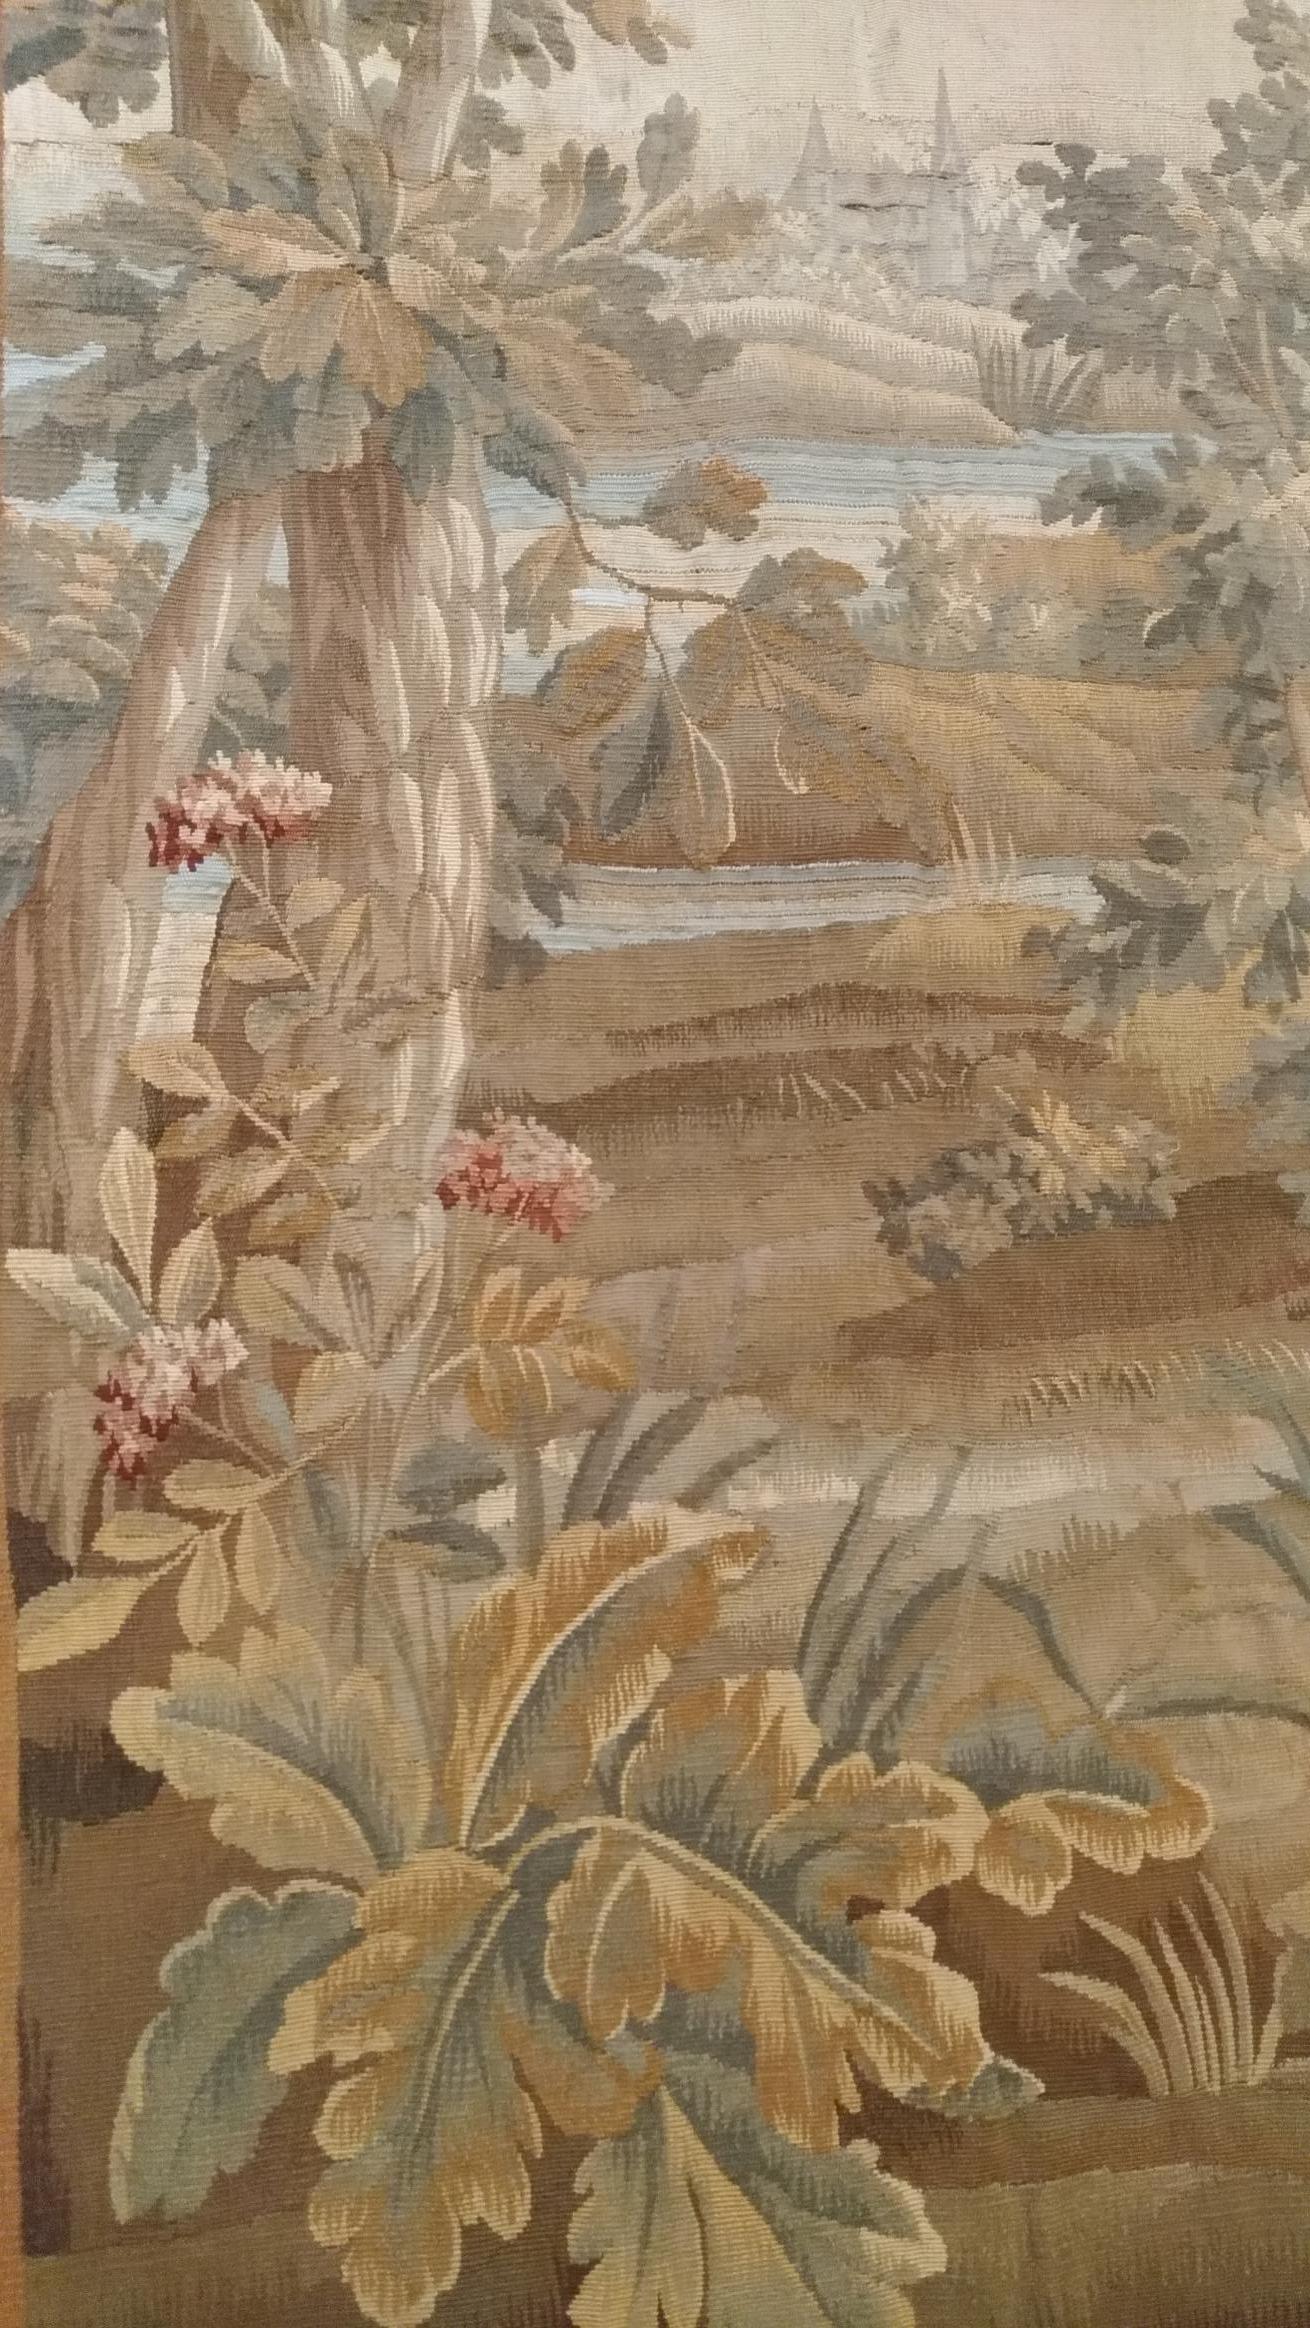 1039 - Beautiful French Aubusson Tapestry from the End of the 19th Century 1